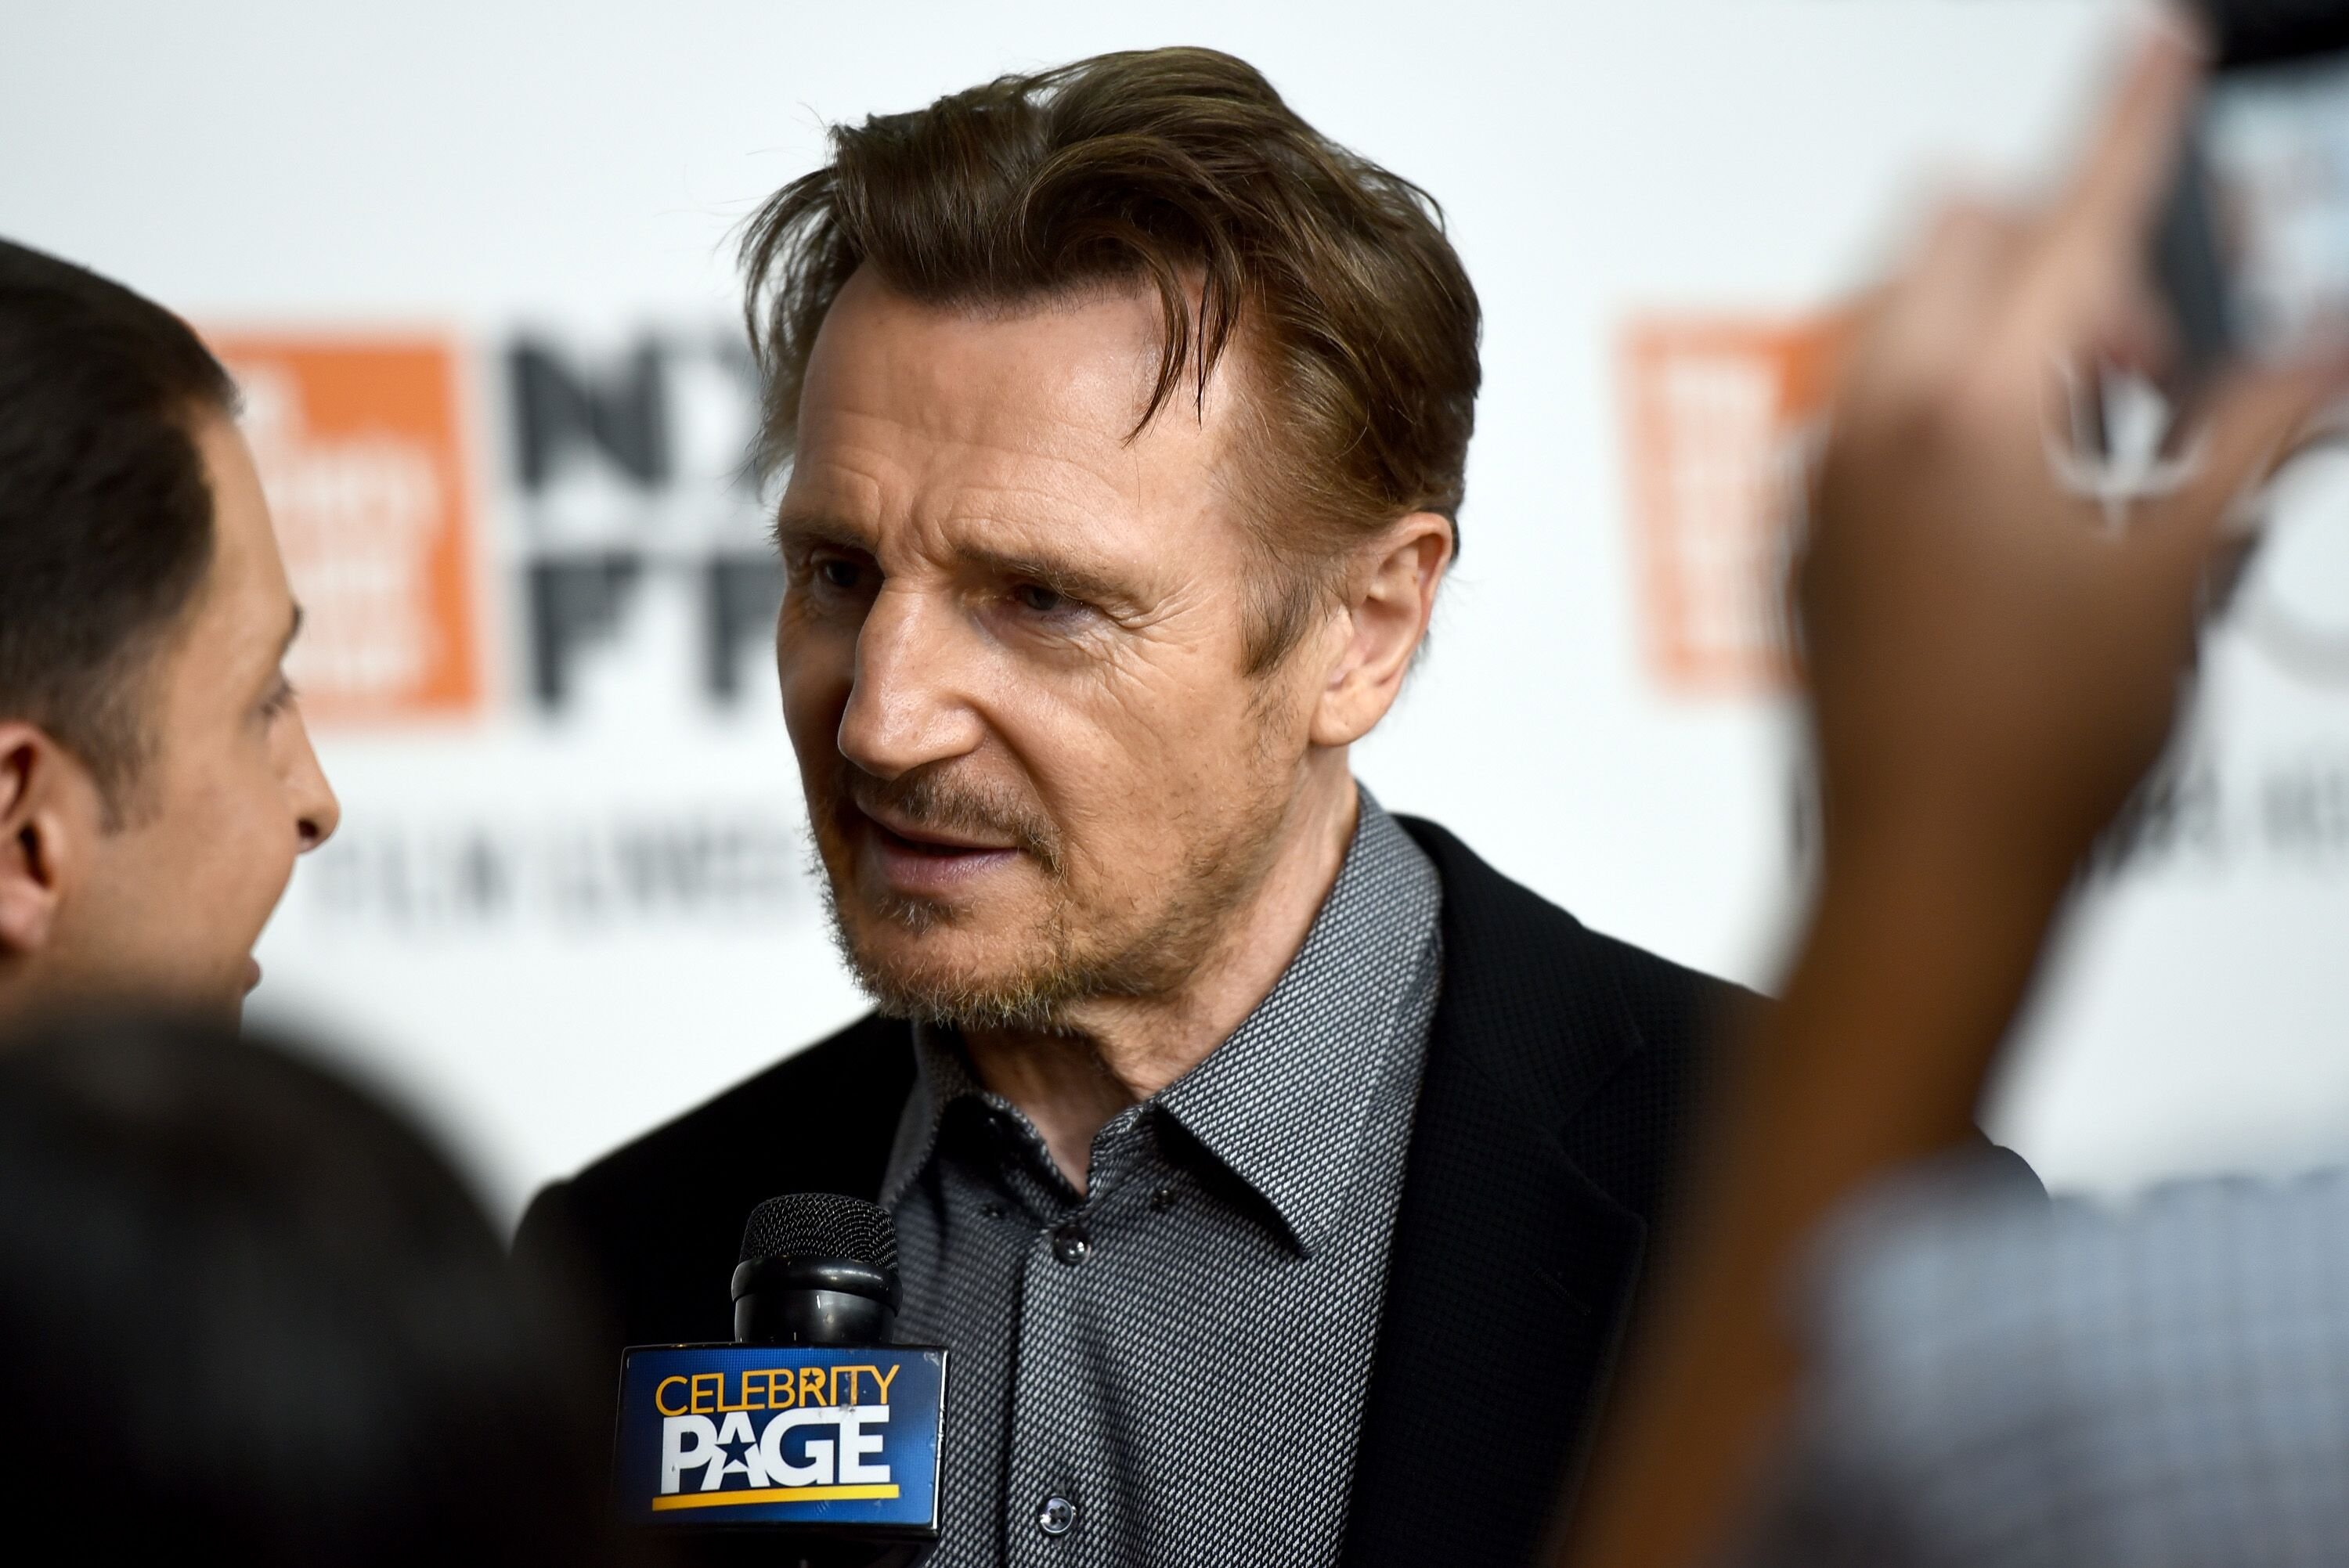 Liam Neeson attends the Netflix's "The Ballad of Buster Scruggs" NYFF Red Carpet Premiere. | Source: Getty Images